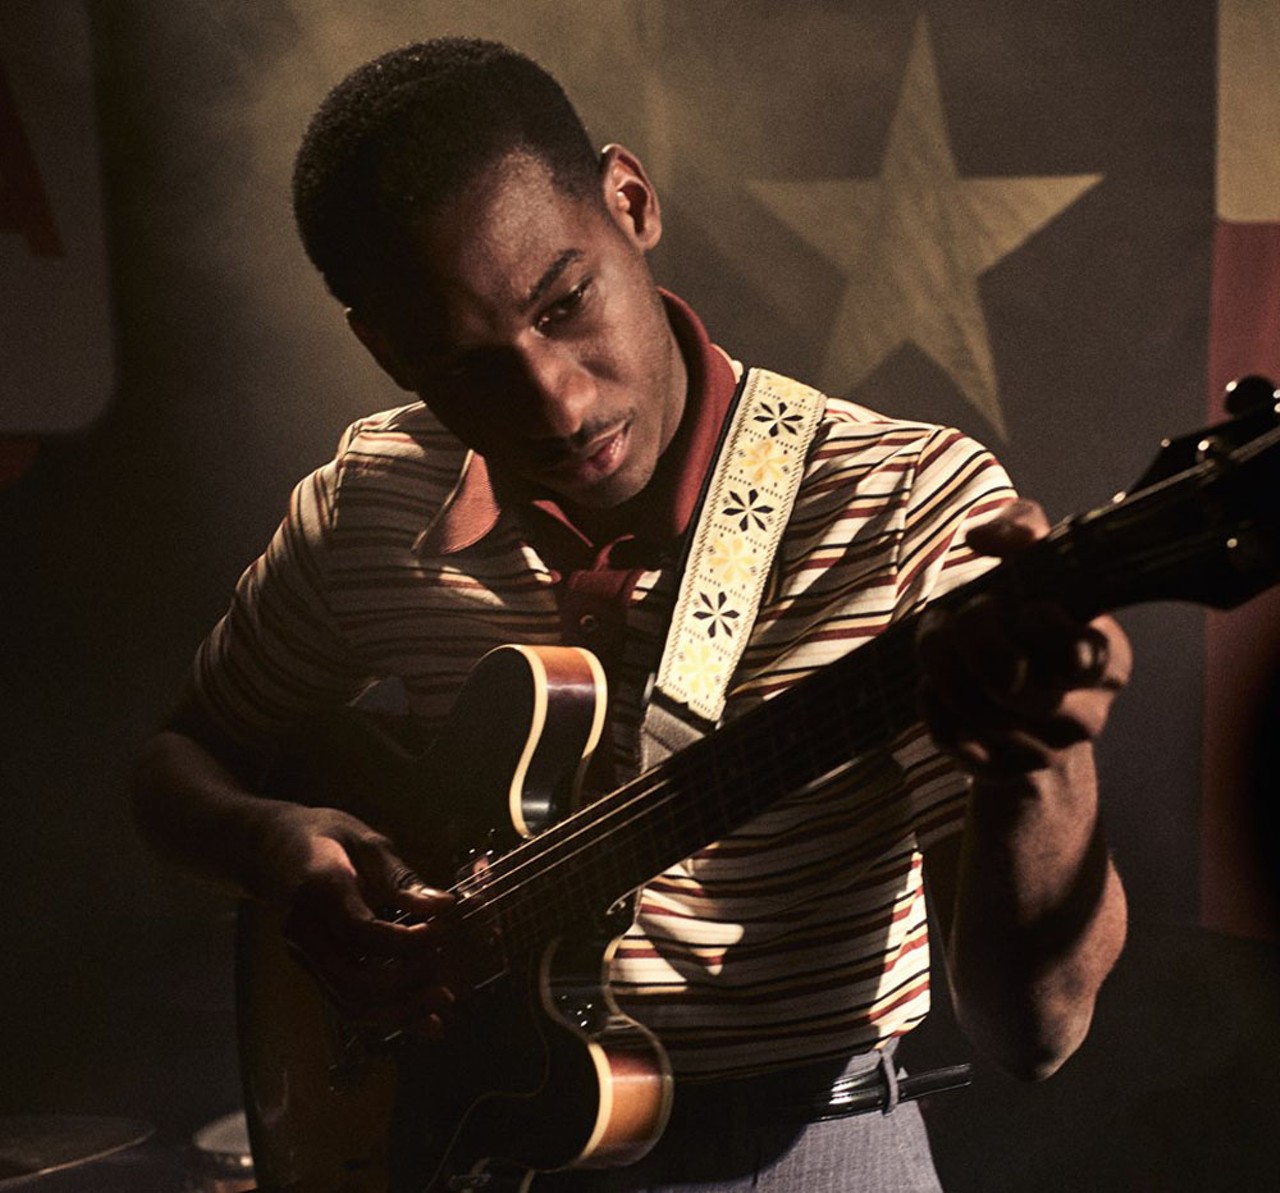 Leon Bridges- Sept 30 @ Fillmore 
After making a SNL debut last Spring, Leon Bridges is the leading force in the neo-soul genre. Bridges just has this coolness about him that can&#146;t be replicated. His song &#147;Smooth Sailing&#148; is effortlessly cool and sly. You&#146;ll feel like you&#146;re watching a band in the 1960&#146;s playing instead of 2016. Lianna La Havas is set to open. 
Doors at 7 p.m.; 2115 Woodward Ave., Detroit; Tickets are $35 or $50. 
Photo via Facebook